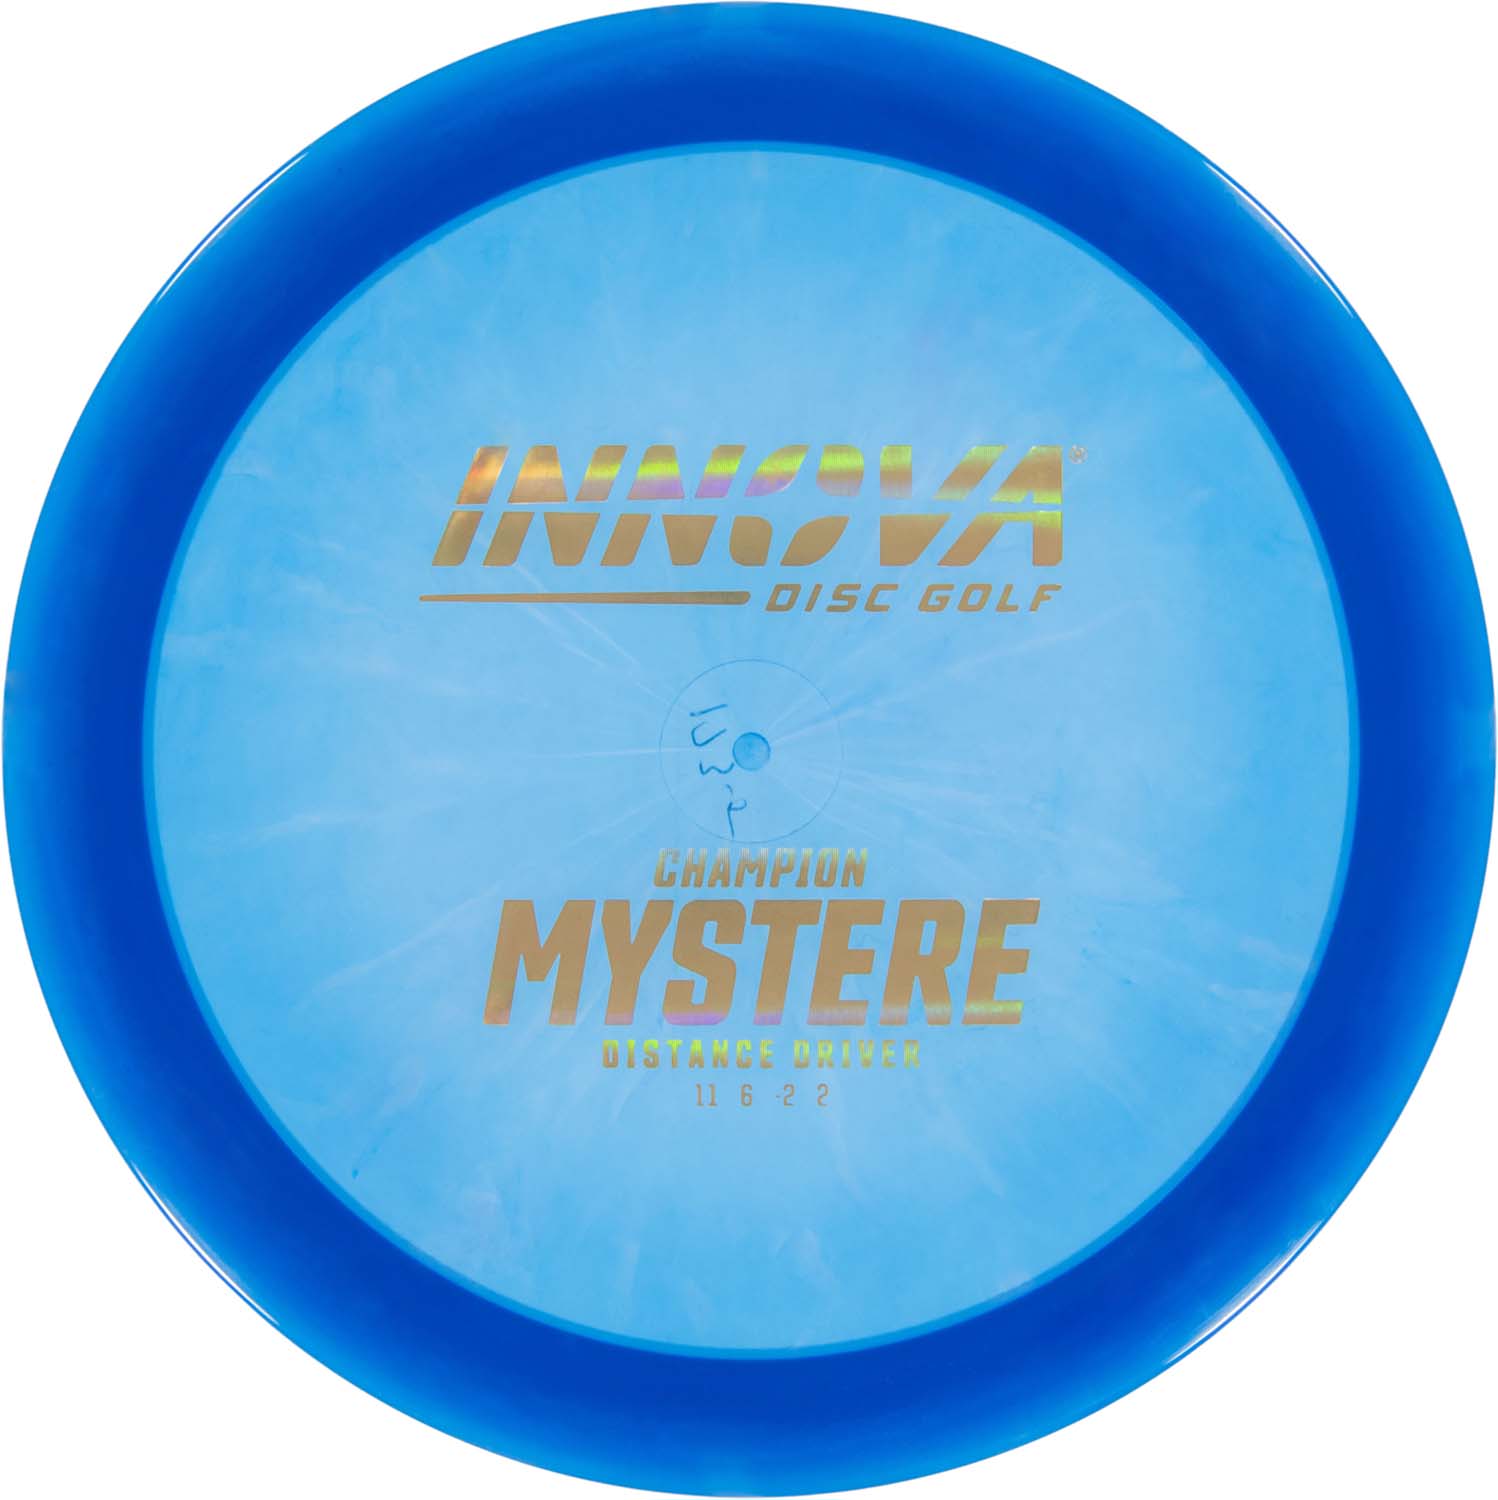 Champion Mystere from Disc Golf United